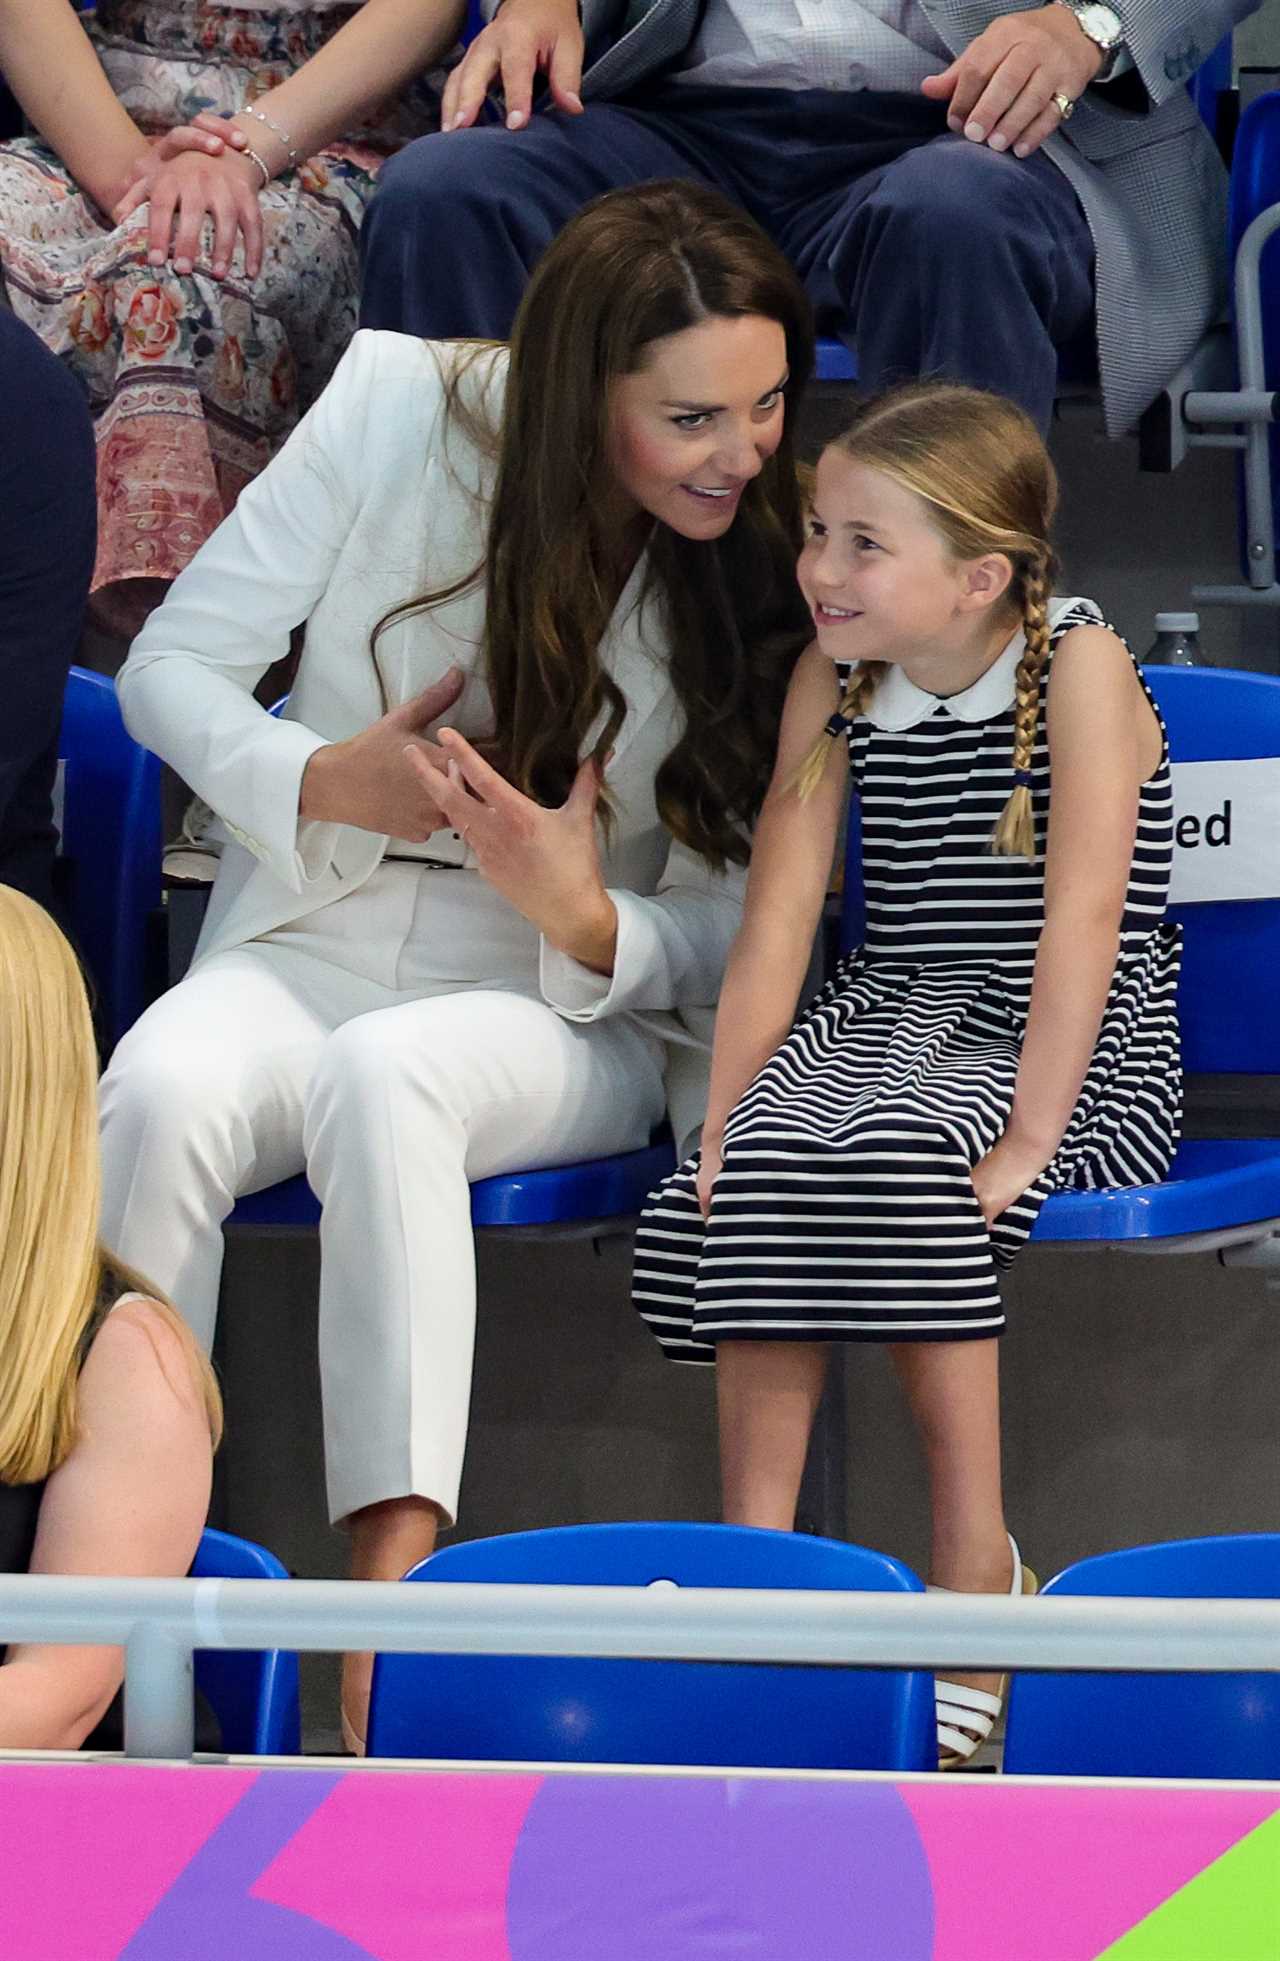 I’m a body language pro – I spied 3 key changes in Kate Middleton at Games & clues about Princess Charlotte’s character